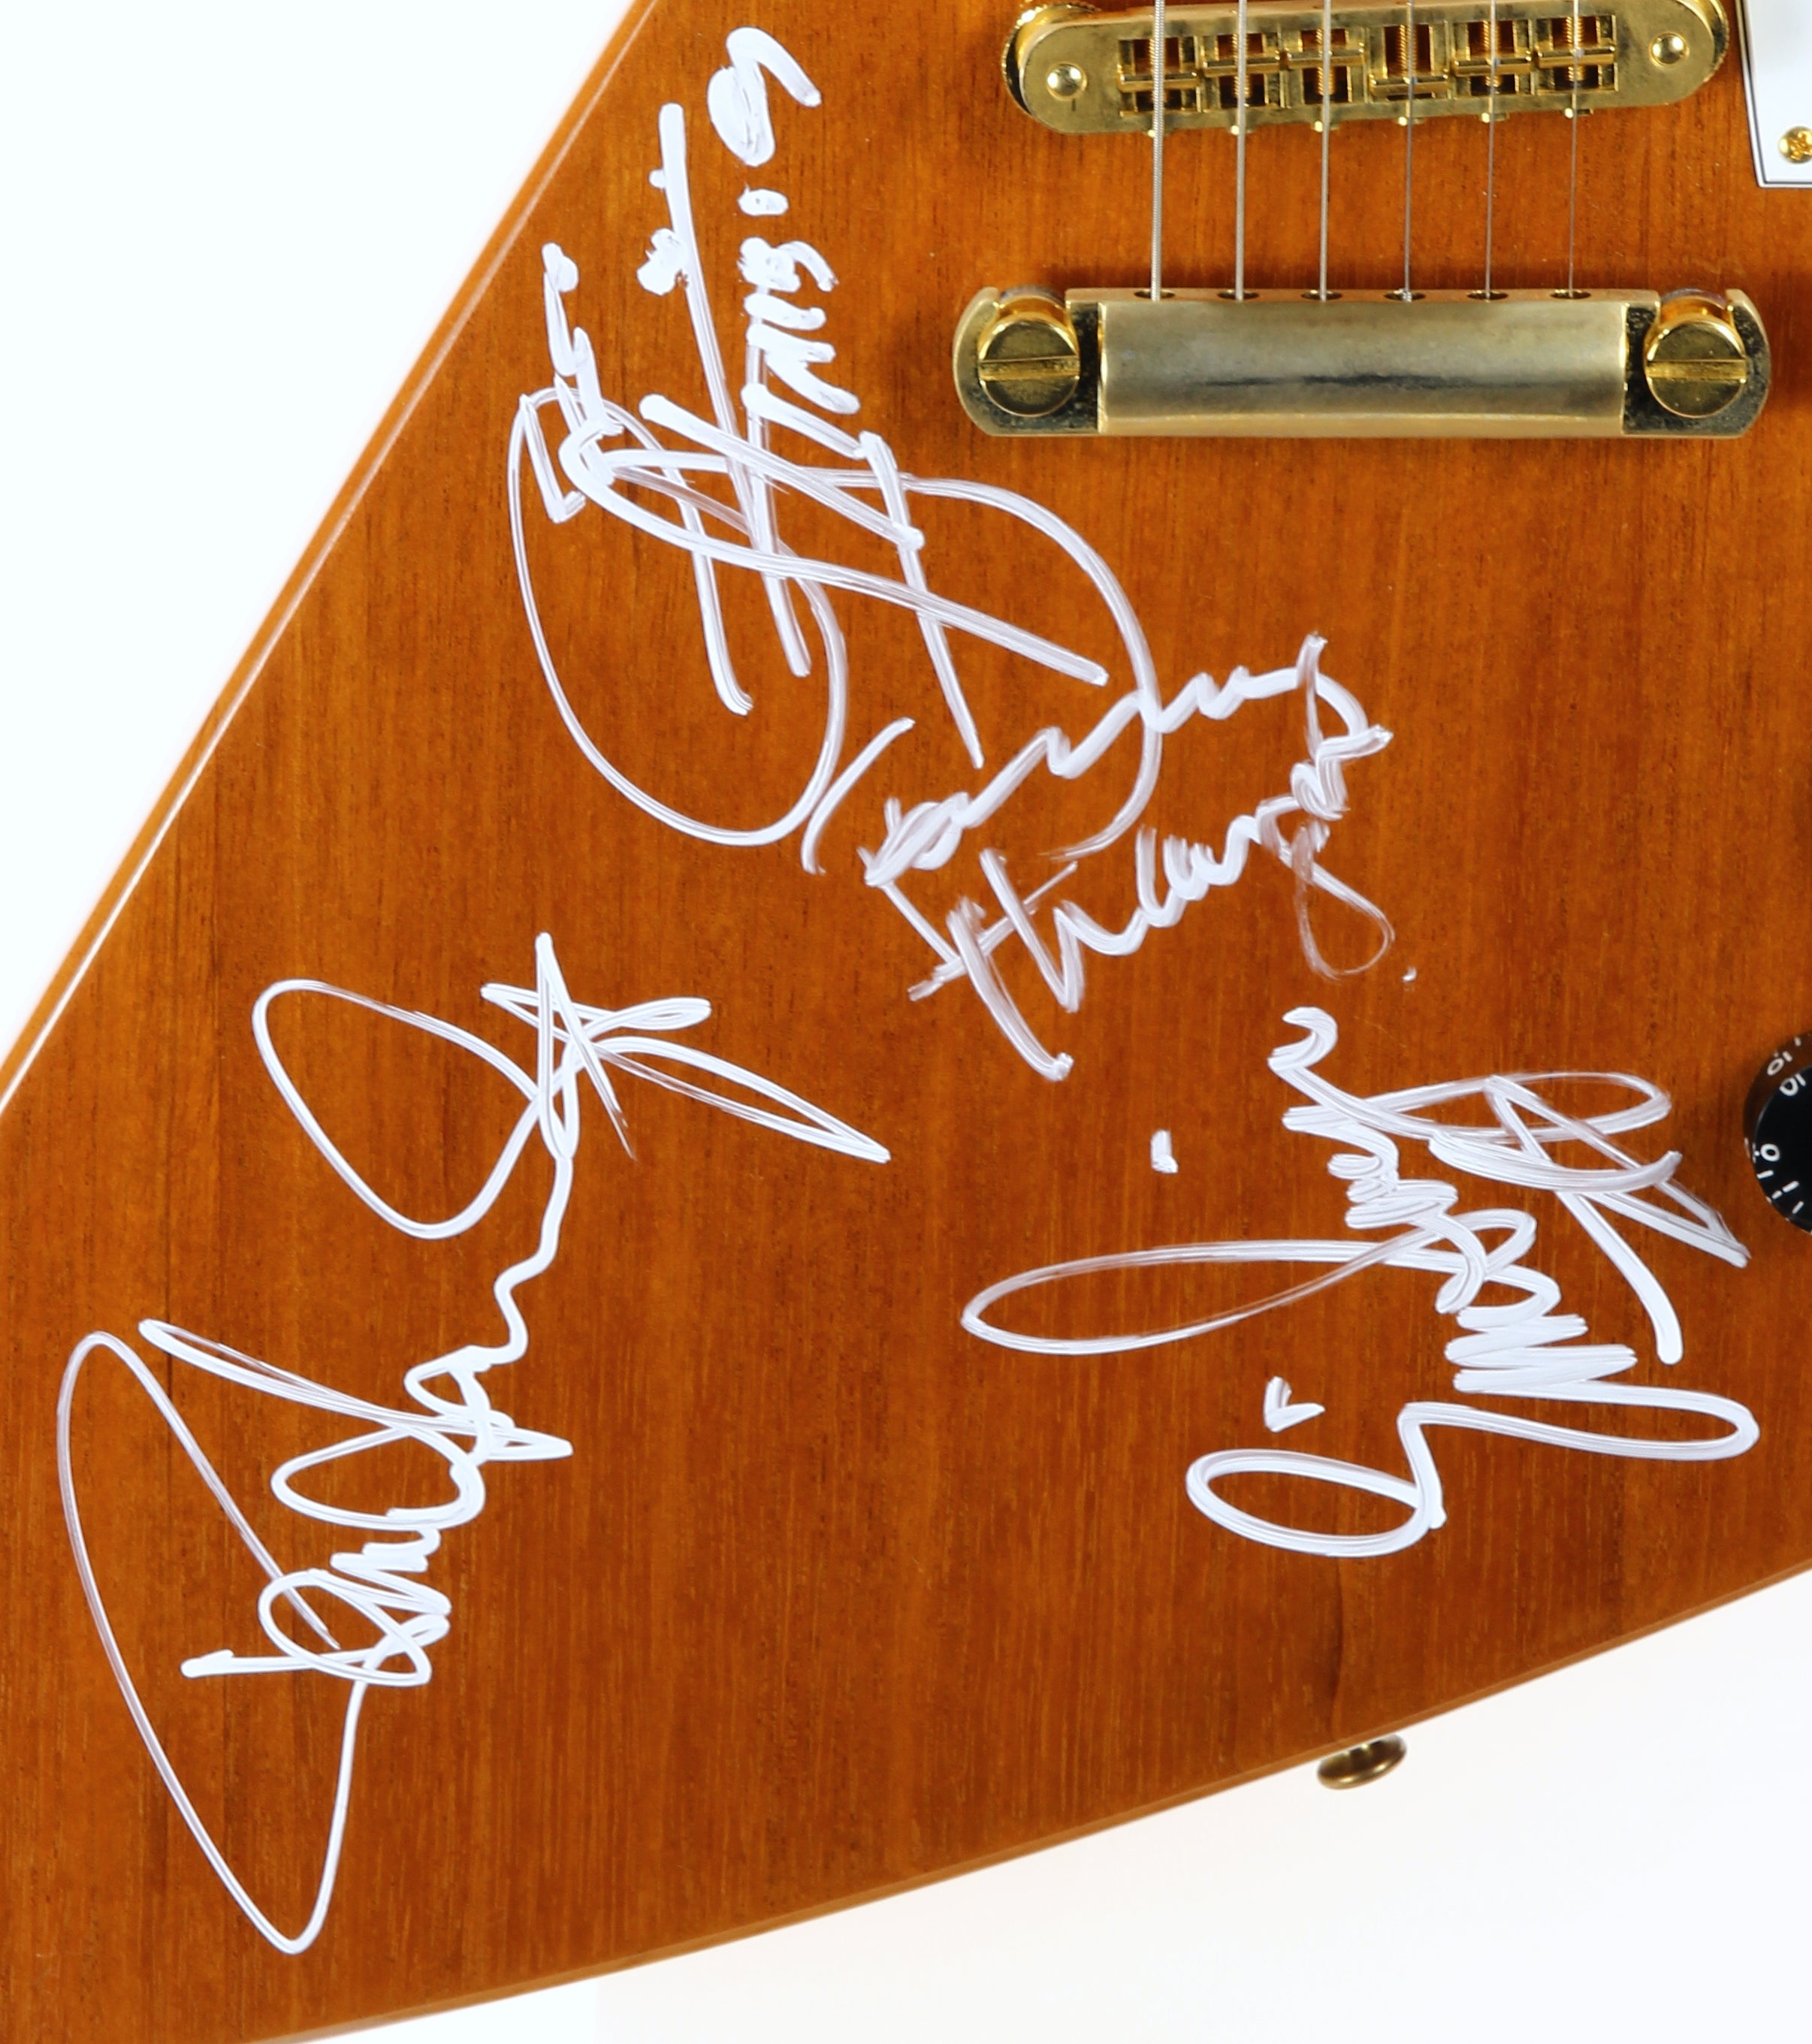 *SOLD*  SIGNED BY KISS! 2009 Gibson '76 Reissue Explorer - Paul Stanley, Gene Simmons, Tommy Thayer, Eric Singer Autographs - Kiss Alive 35 Tour!